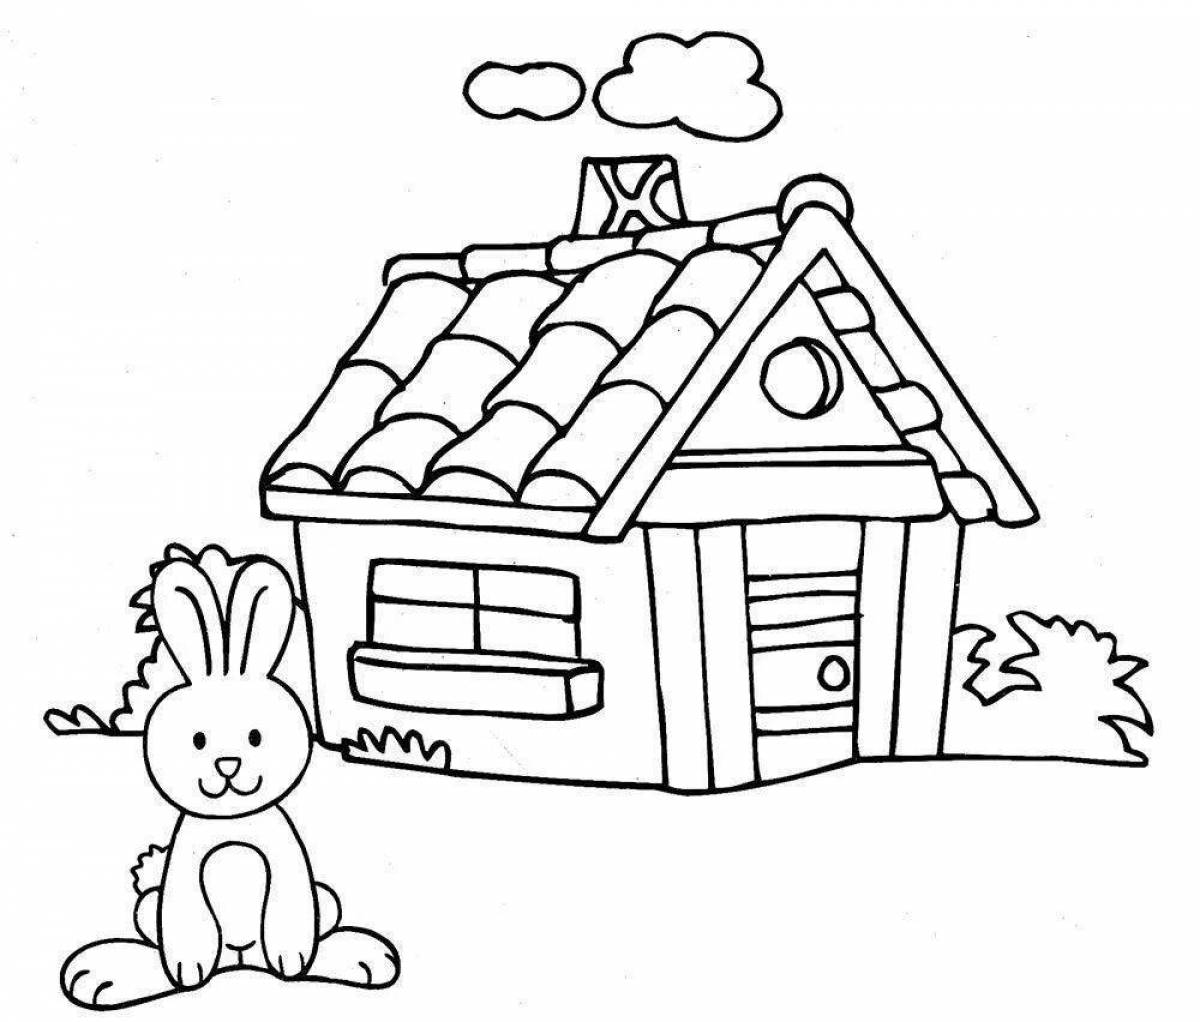 Exotic bast and ice hut coloring page